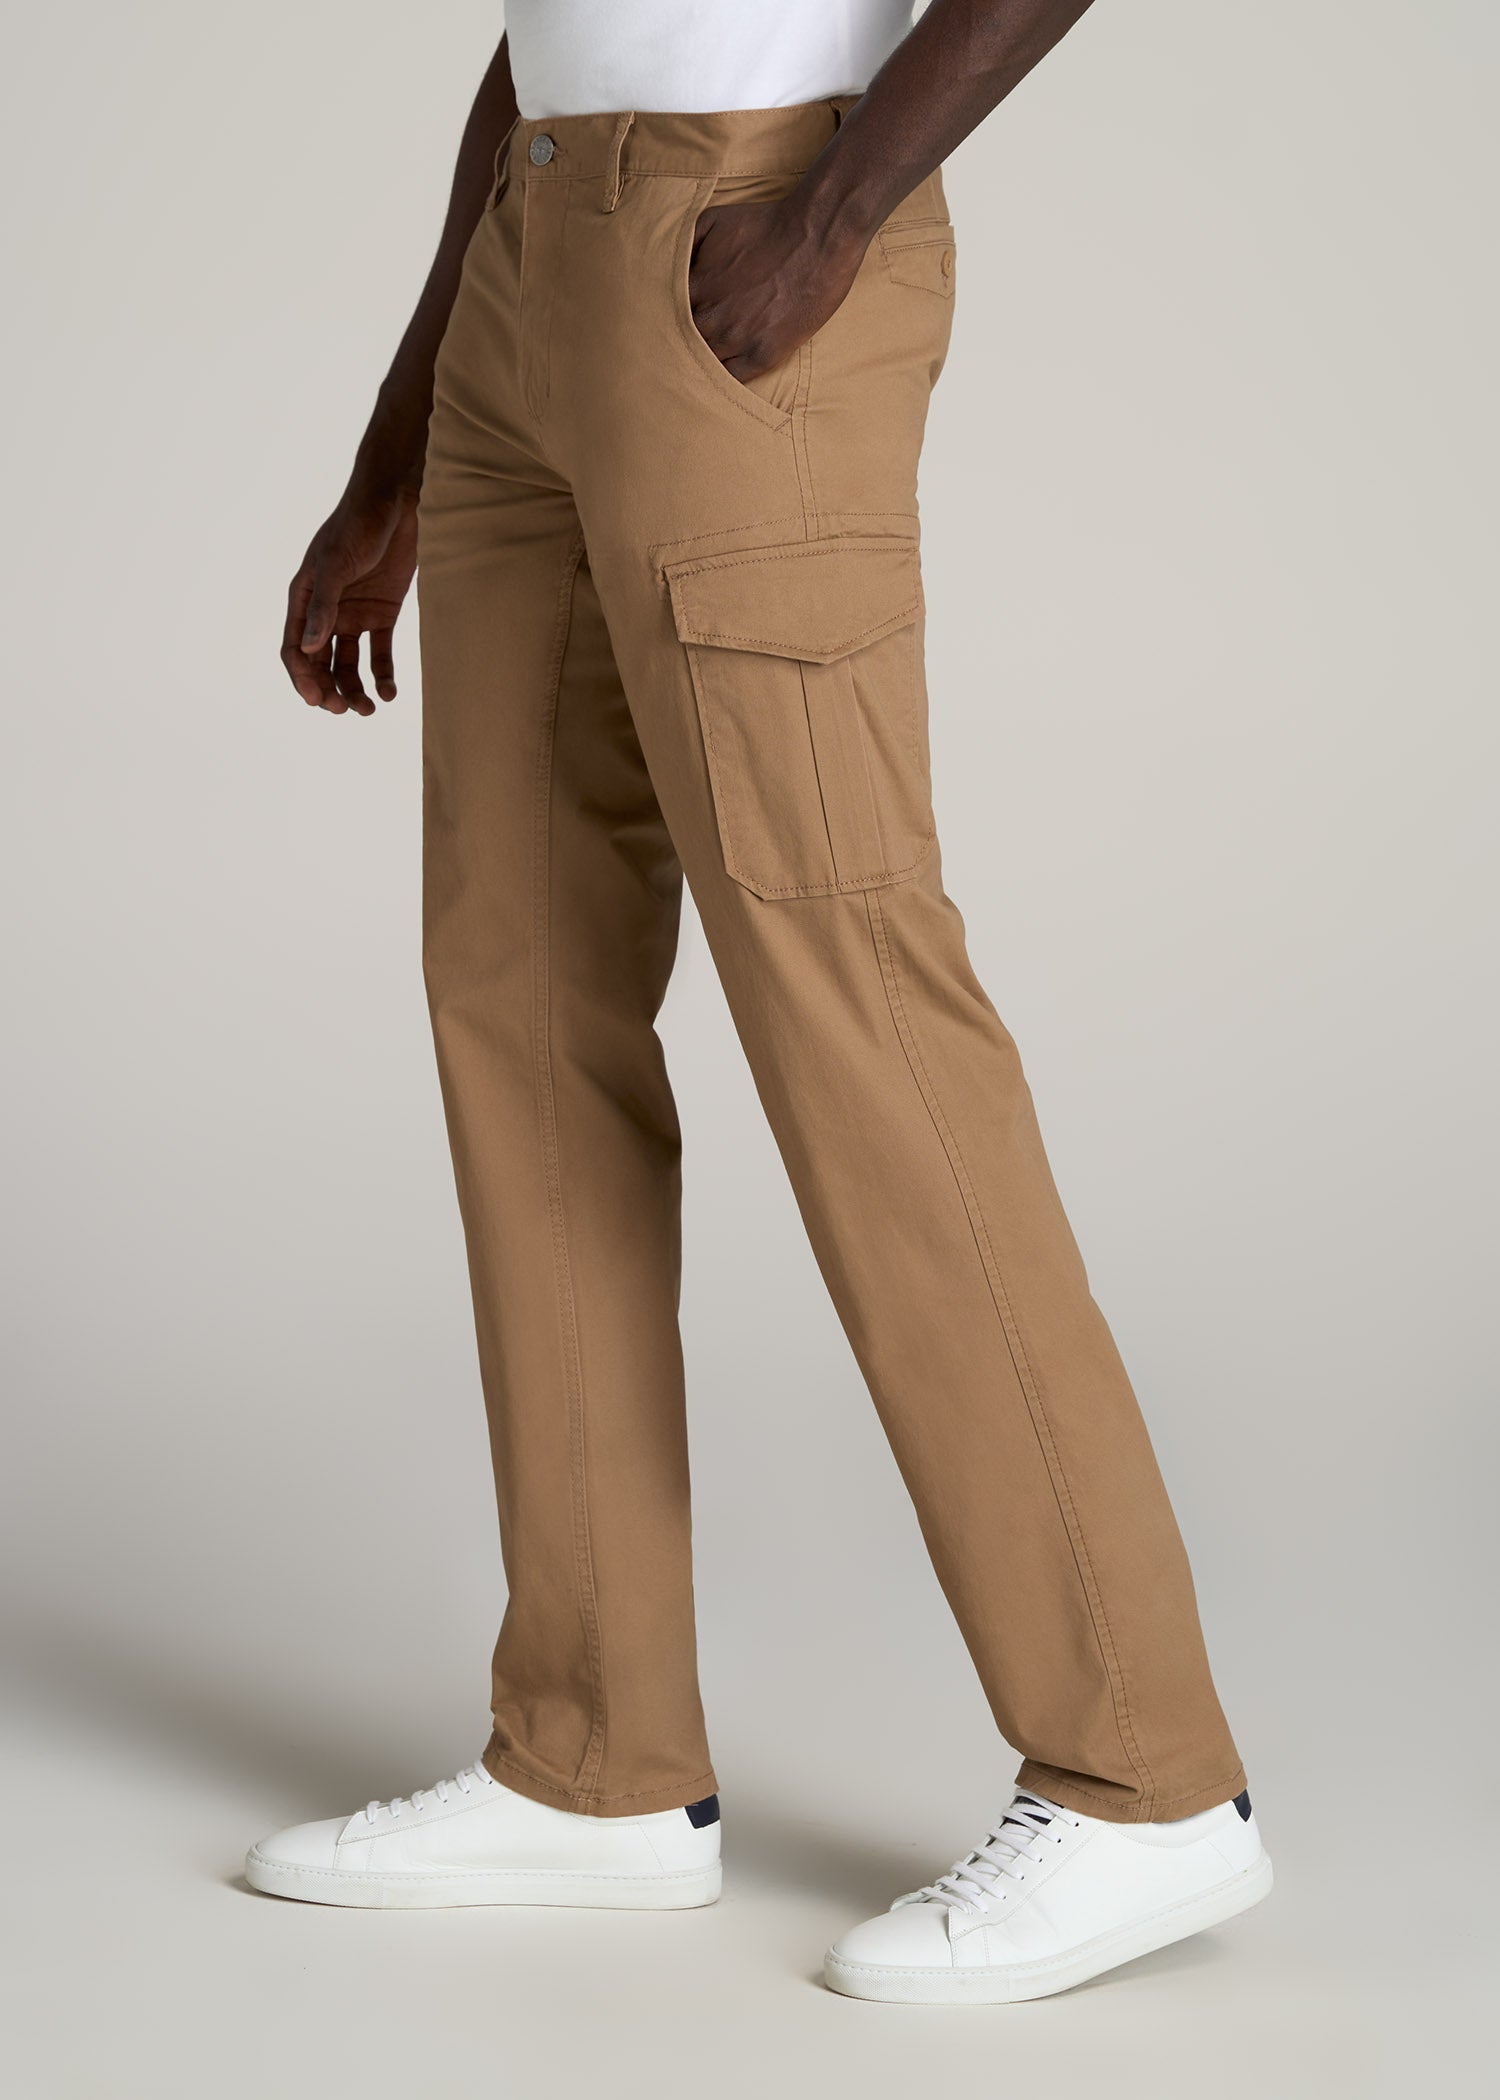 Pants Solid Color Thin Male Men Beam Feet Cargo Pants for Daily Life -  Walmart.com